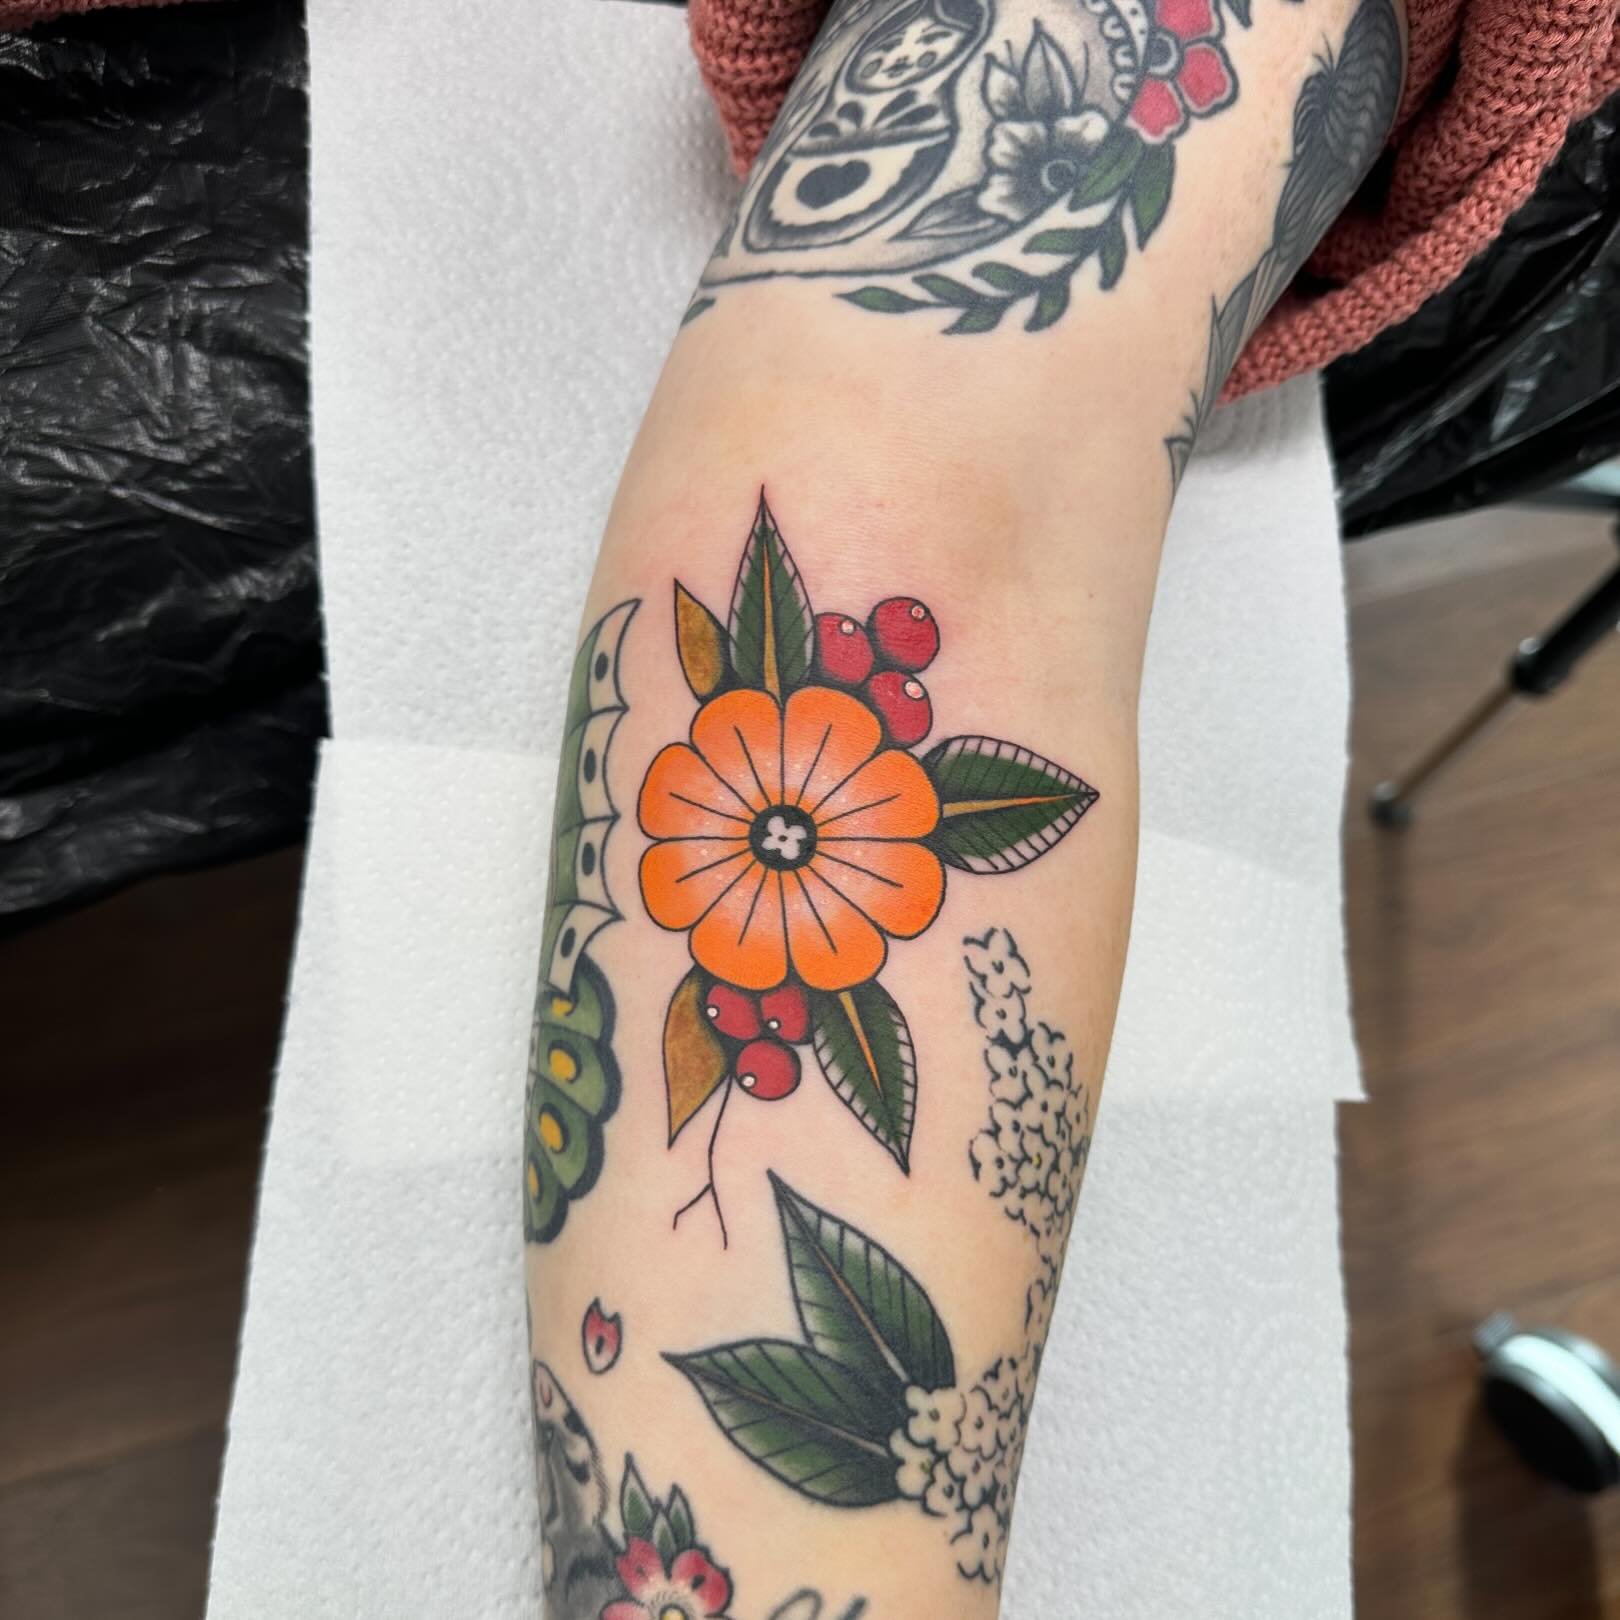 ❤️FLOWER❤️

Thank you Kerstin for the Trust❤️❤️
With Love Chelly❤️
My books are open!!
Dm me if your interested 
Find me @noble_tattoo

.
.
.
.
.
.
.
.
.
.
.
.
.
.
.
.
.
.
.
.
.
.
.
.
.
.
.
.
.
.
.
.
.
.
.
.
#tattoo #traditionaltattoo #customtattoo #